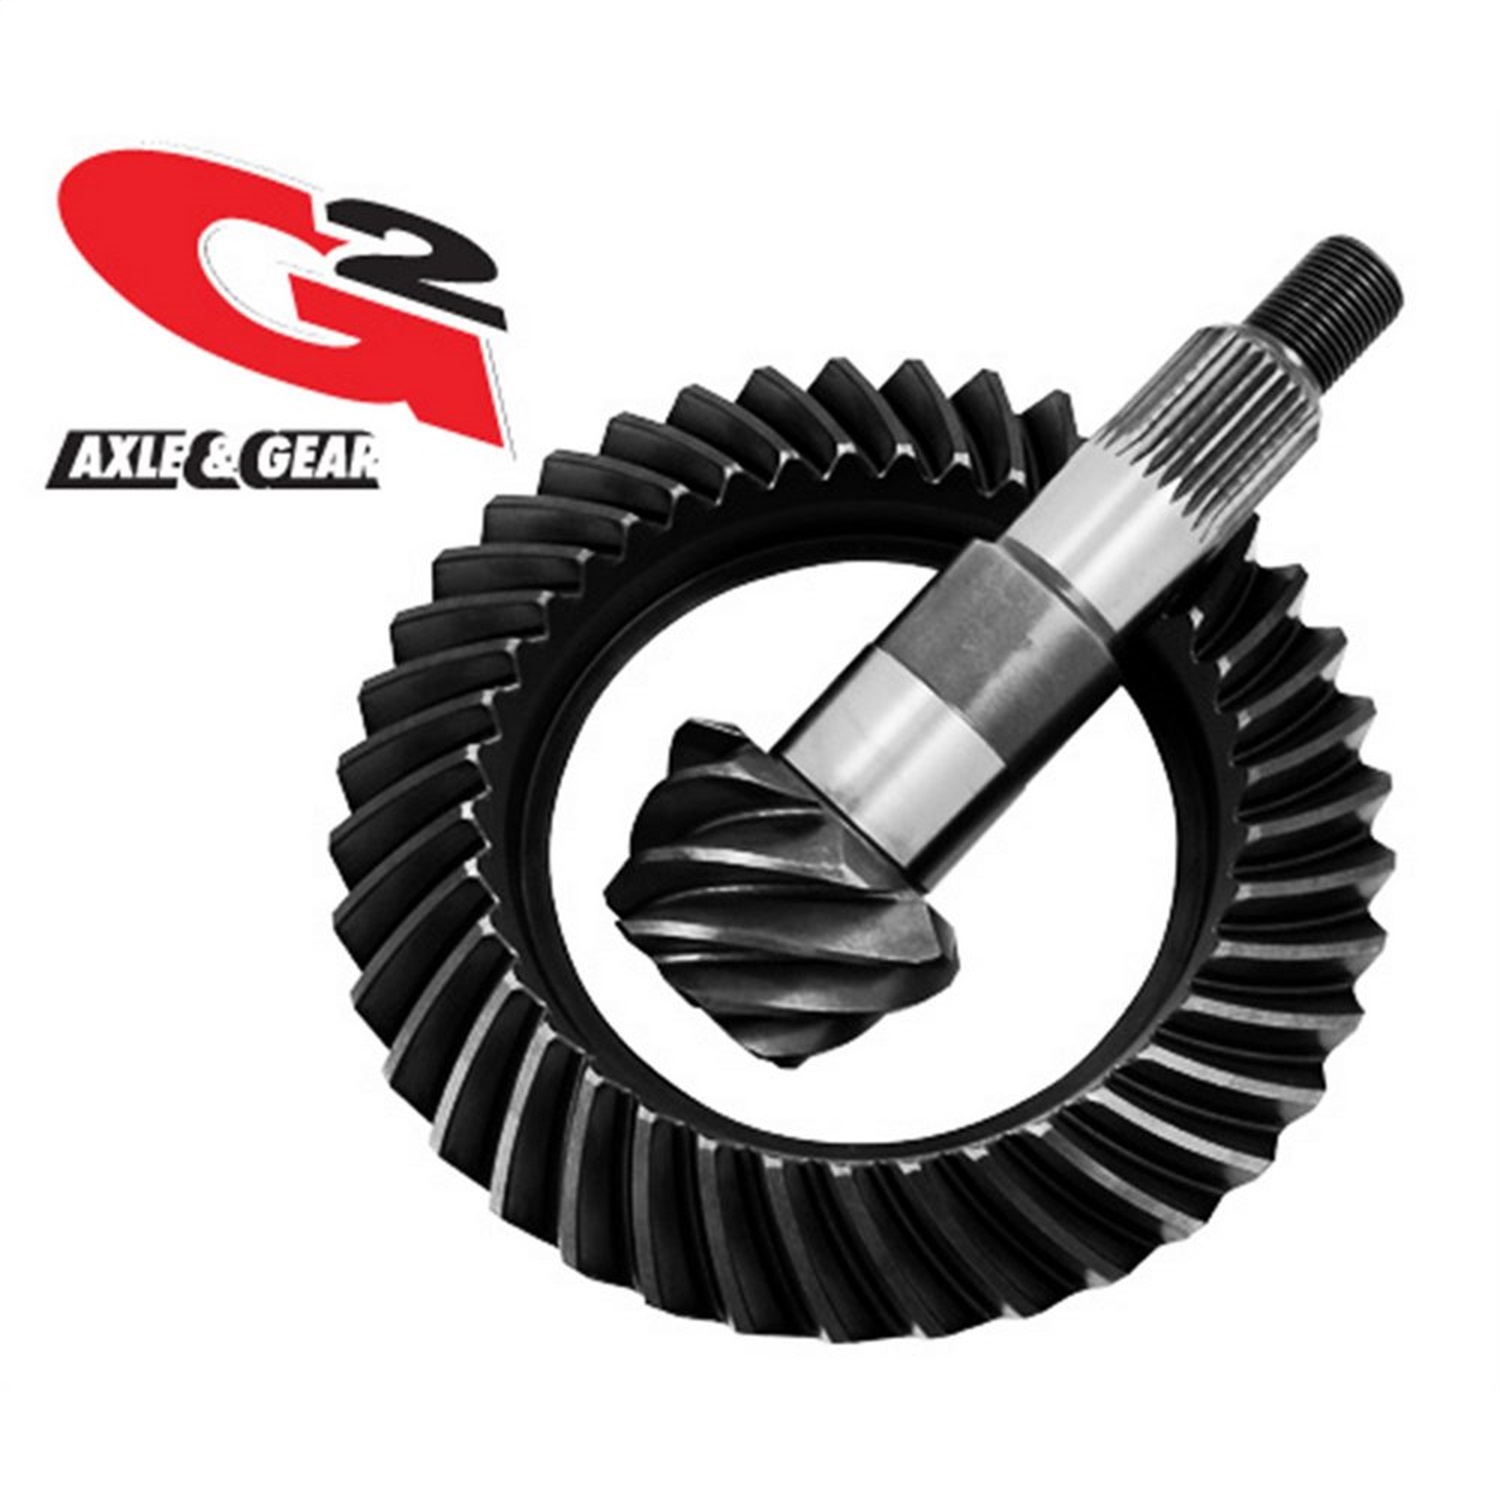 G2 Axle and Gear G2 Axle and Gear 2-2058-456 Ring and Pinion